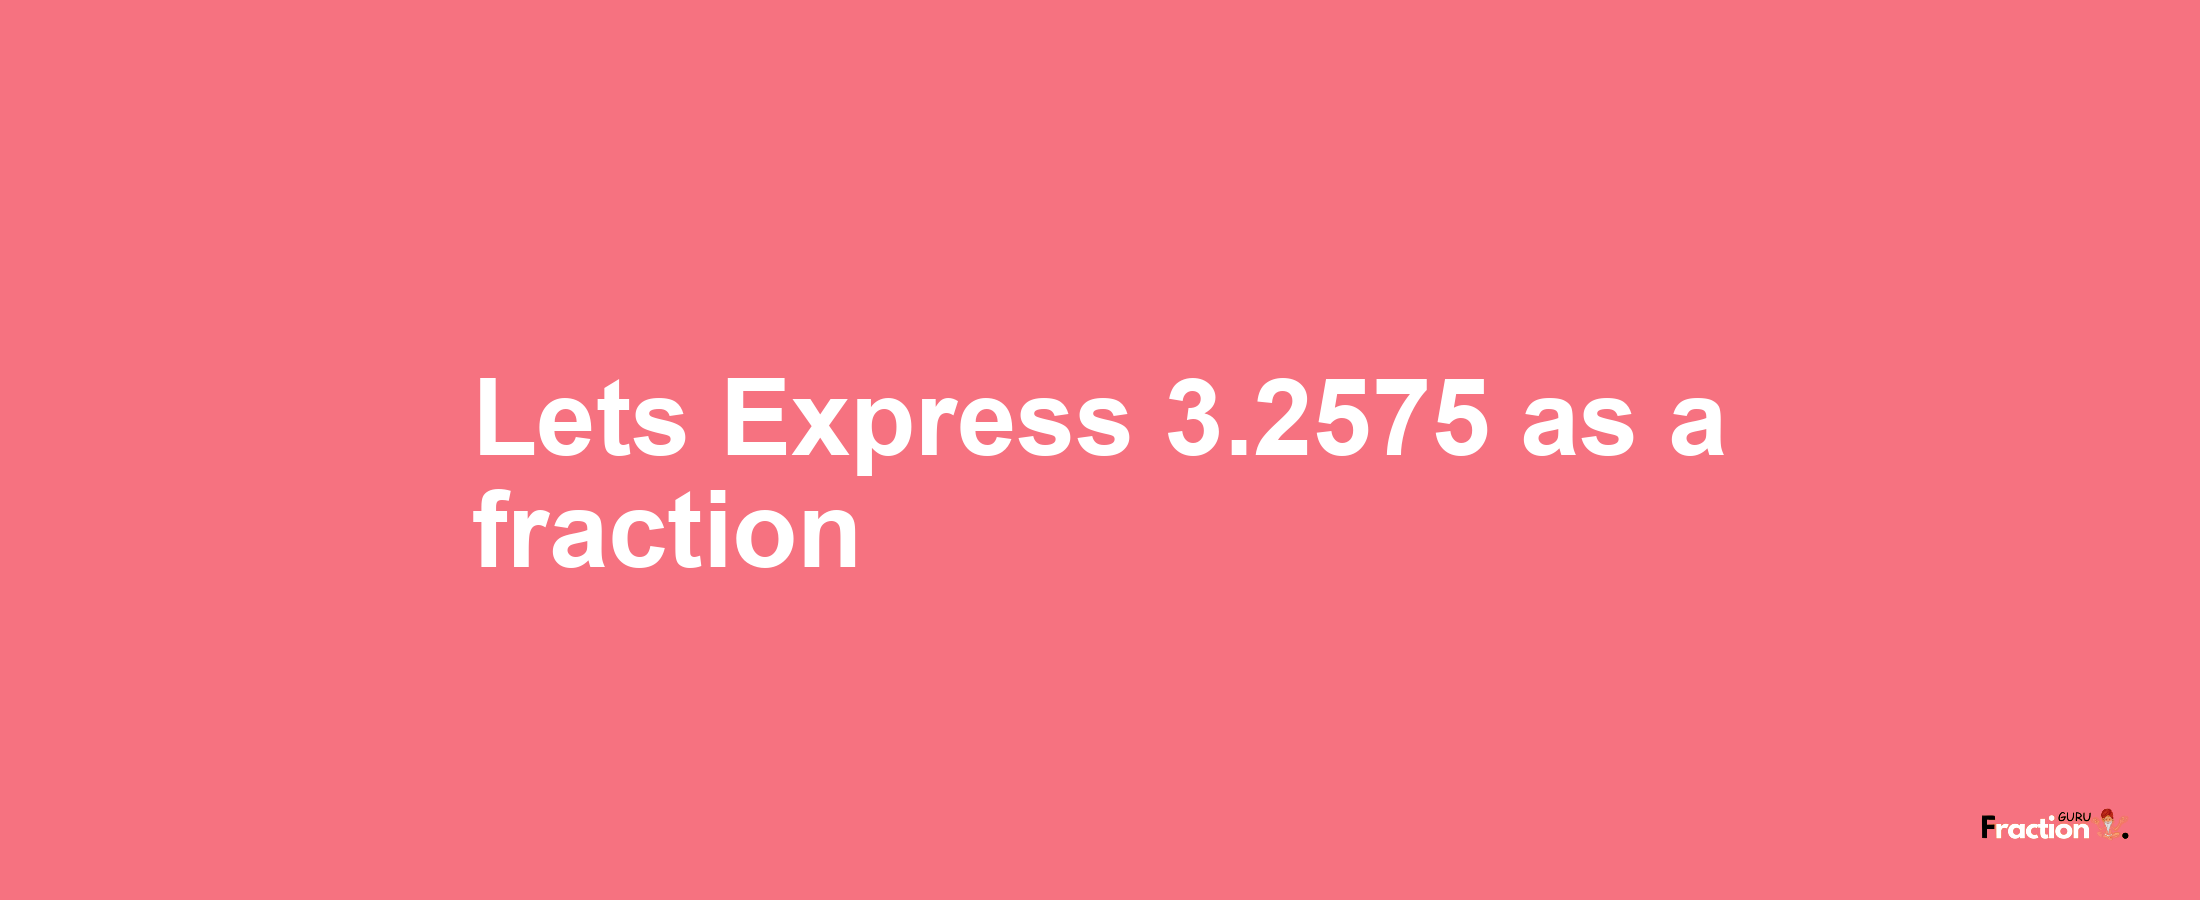 Lets Express 3.2575 as afraction